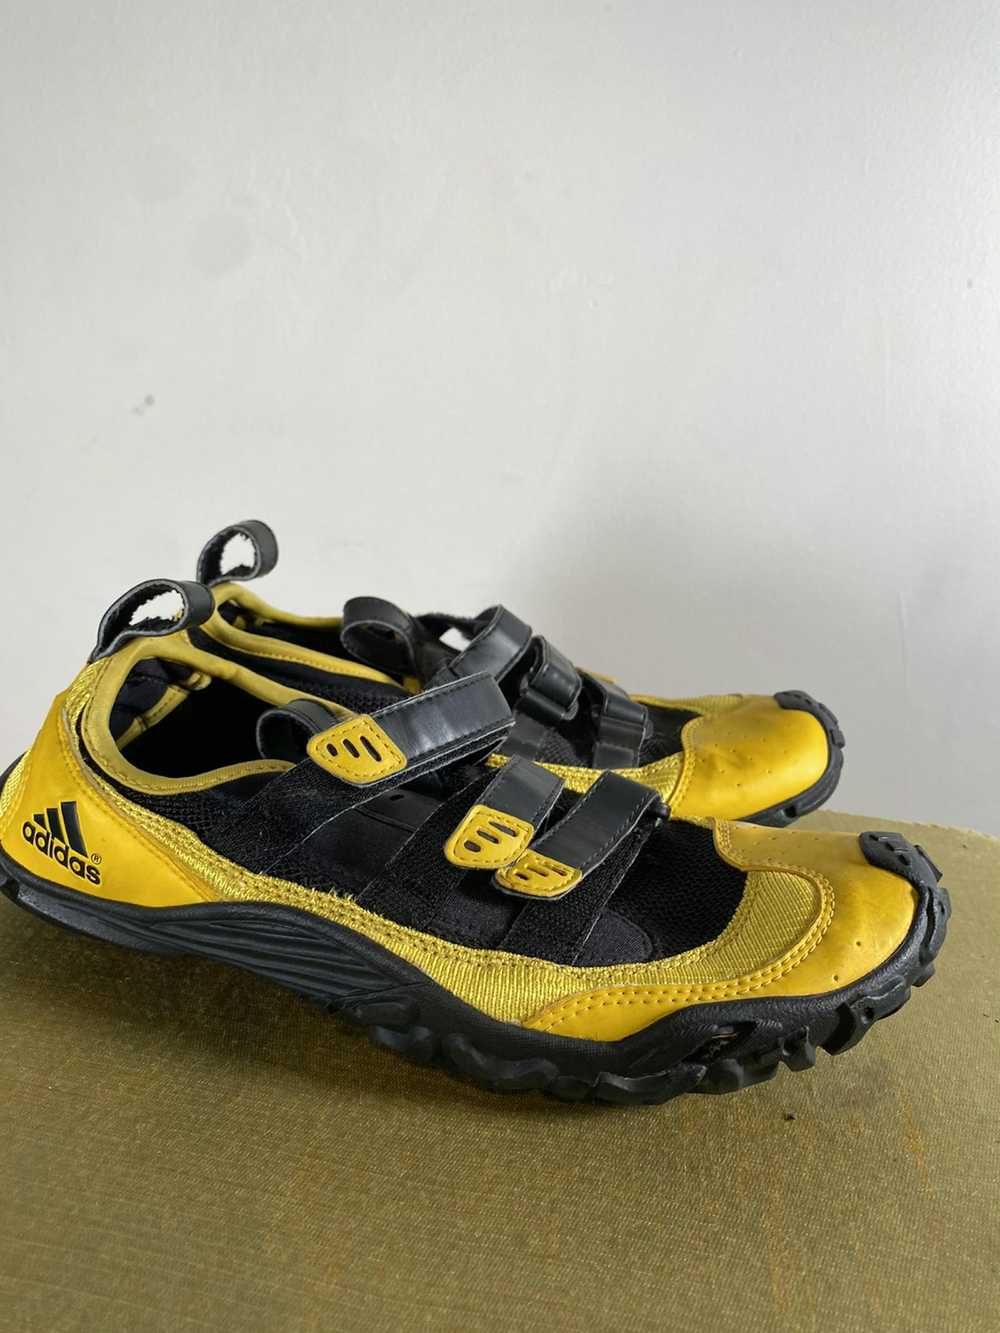 Vintage Velcro Water Shoes - image 8